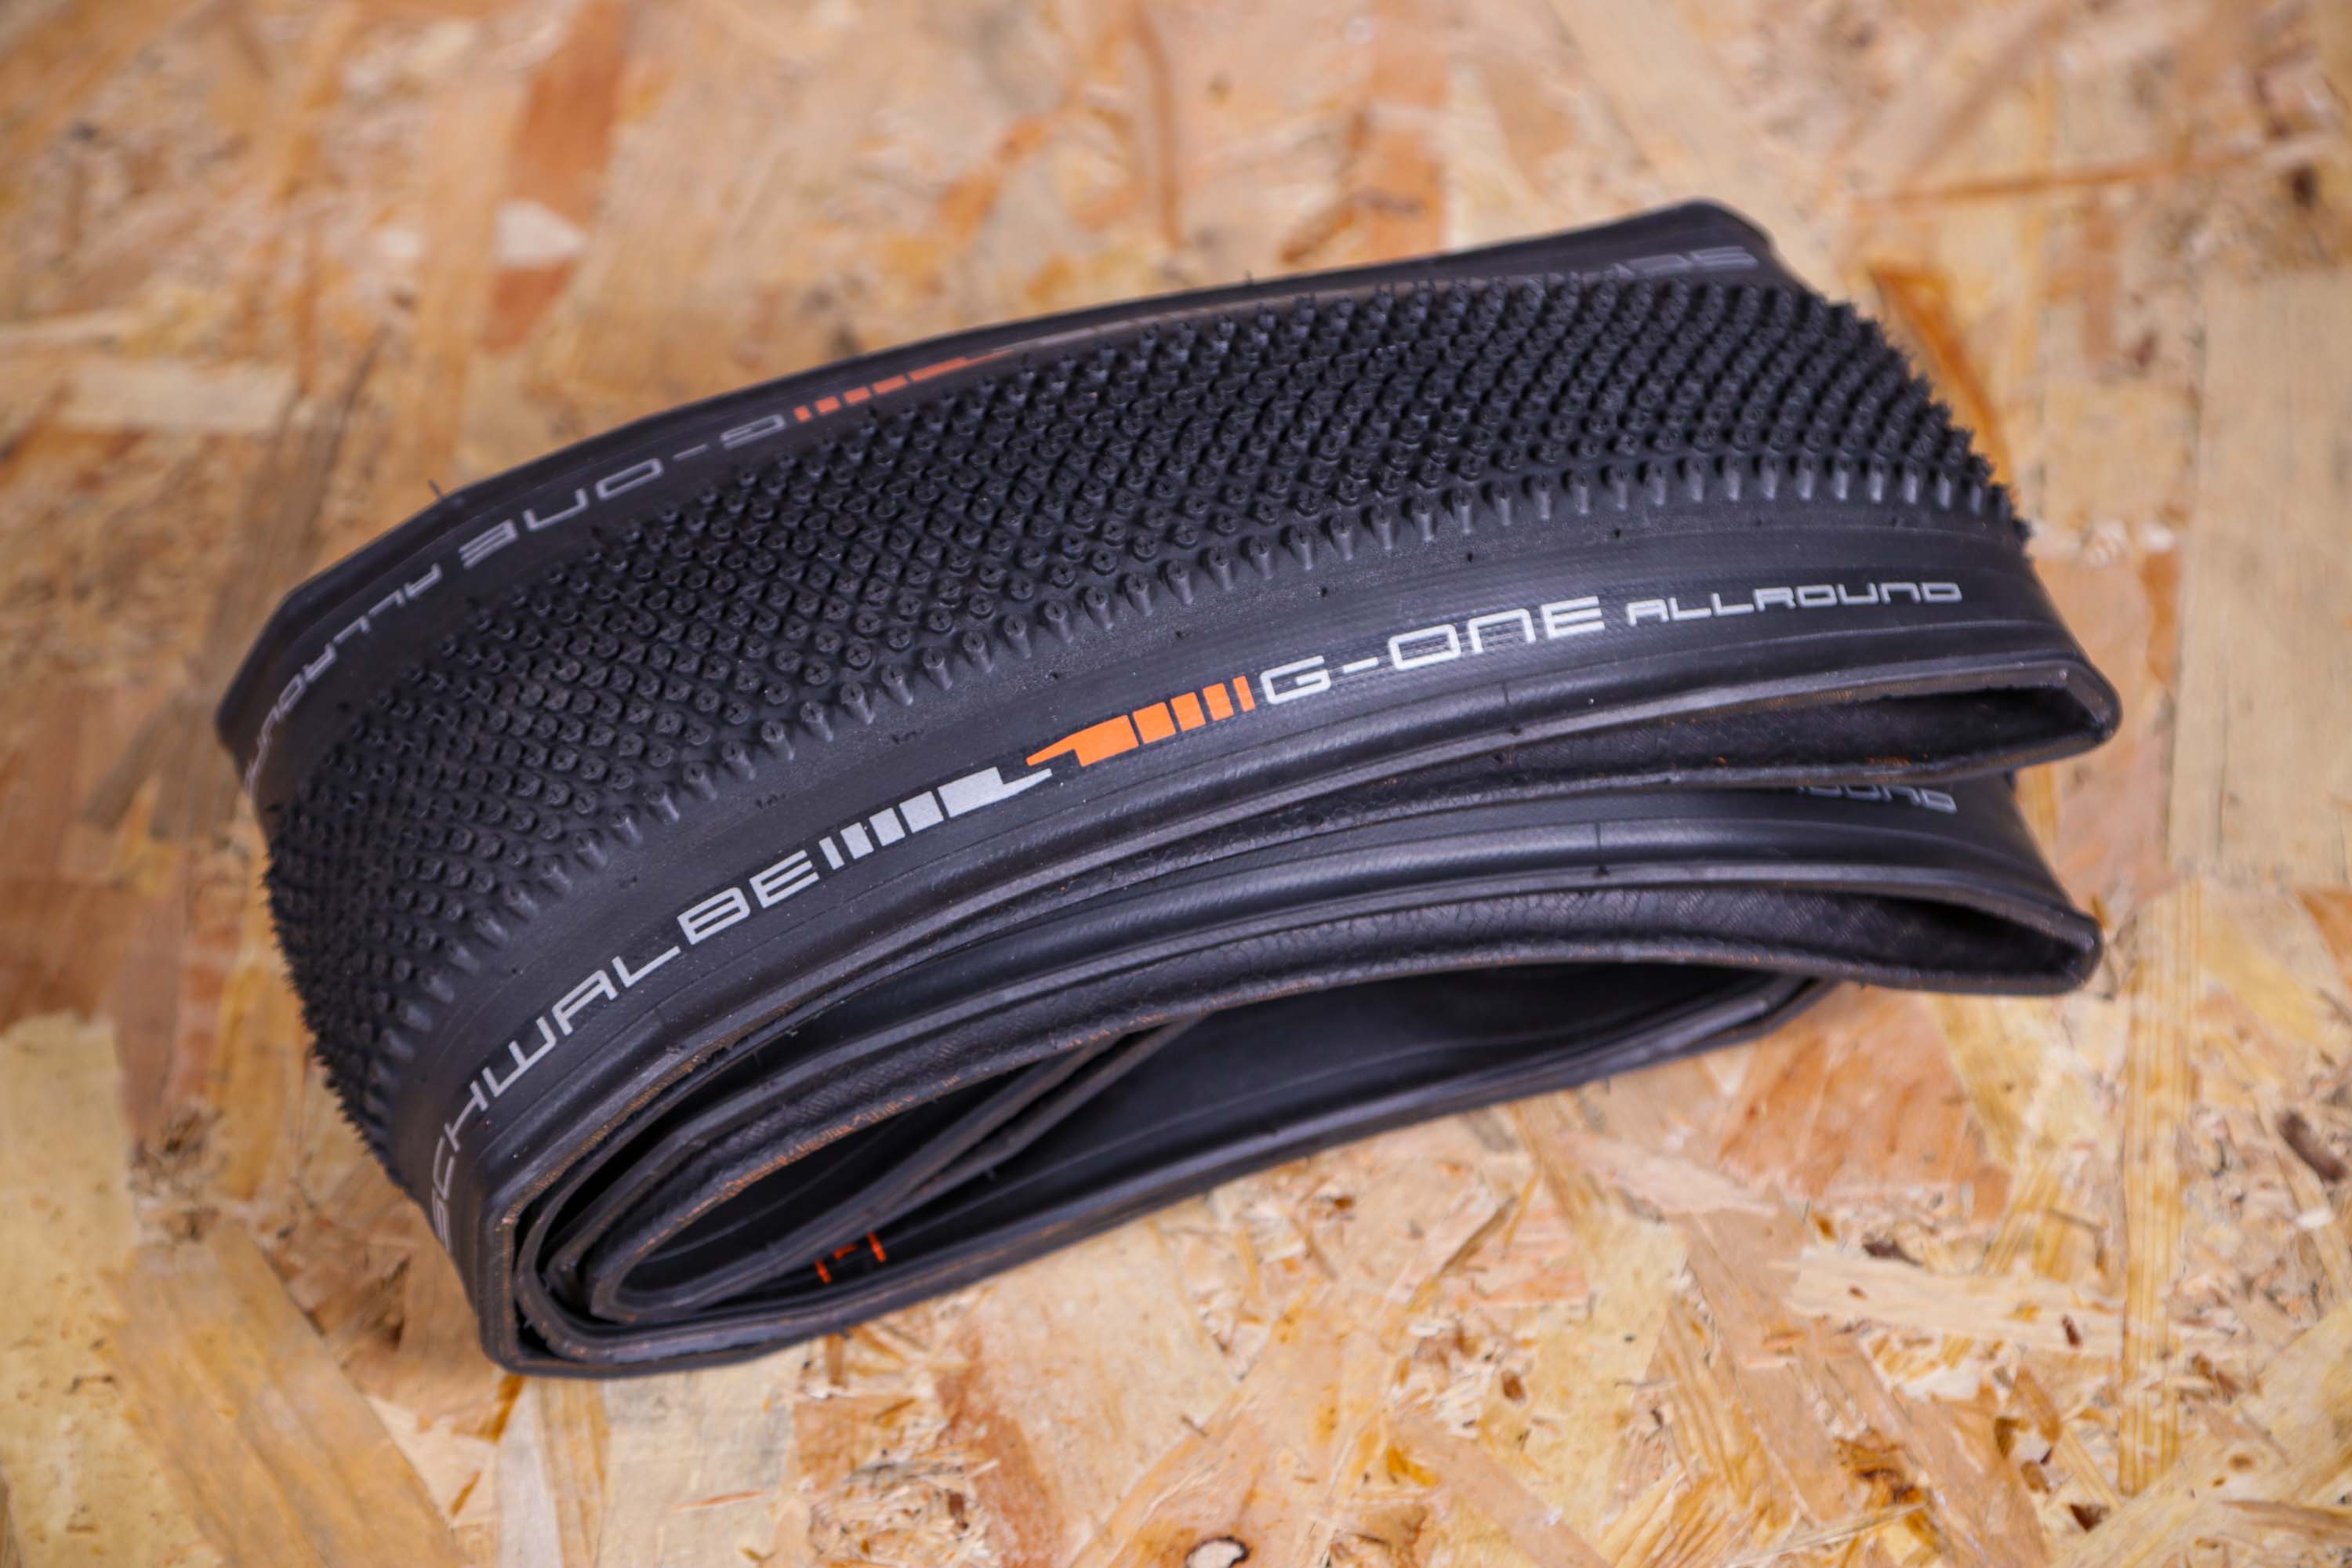 Folding SCHWALBE G-One Allround SuperGround Tubeless Easy Bicycle Tire 